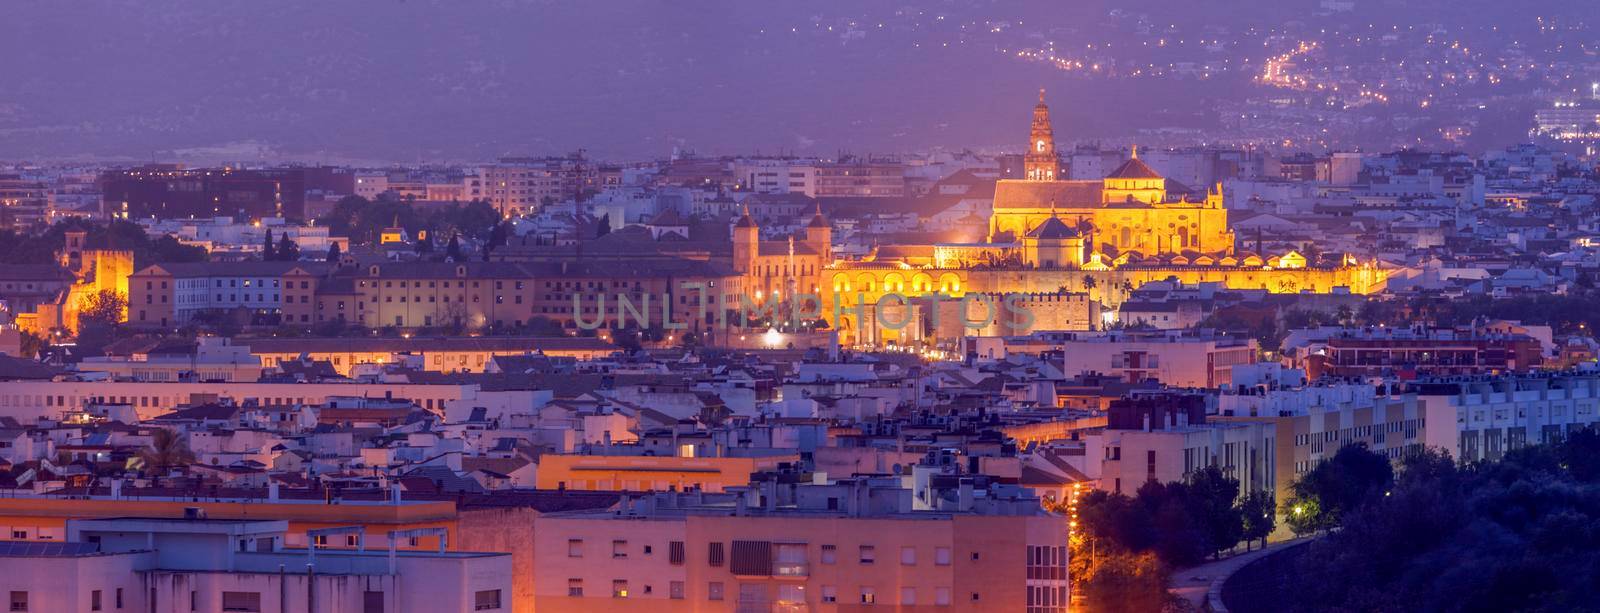 Night panorama of Cordoba with Mosque Cathedral    by benkrut